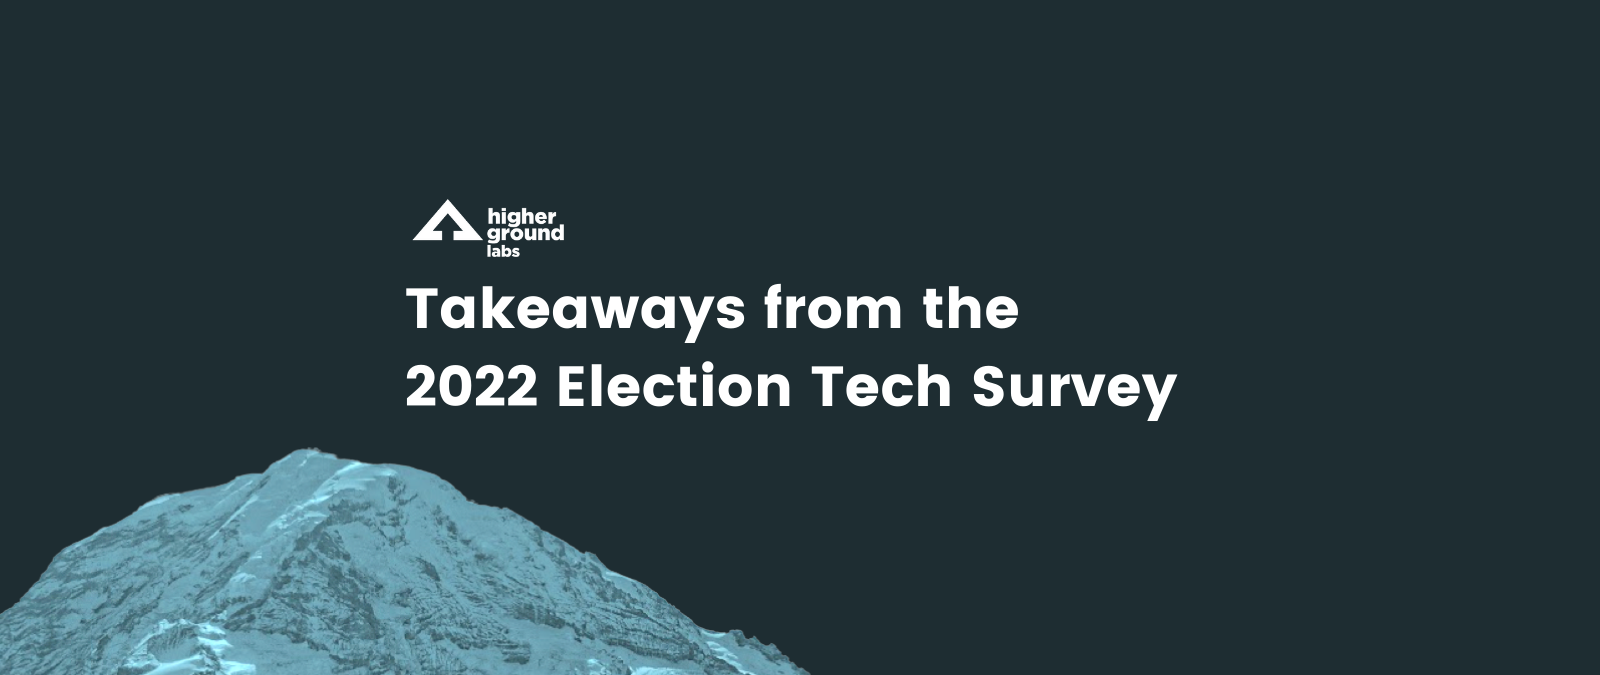 Takeaways from the 2022 Election Tech Survey